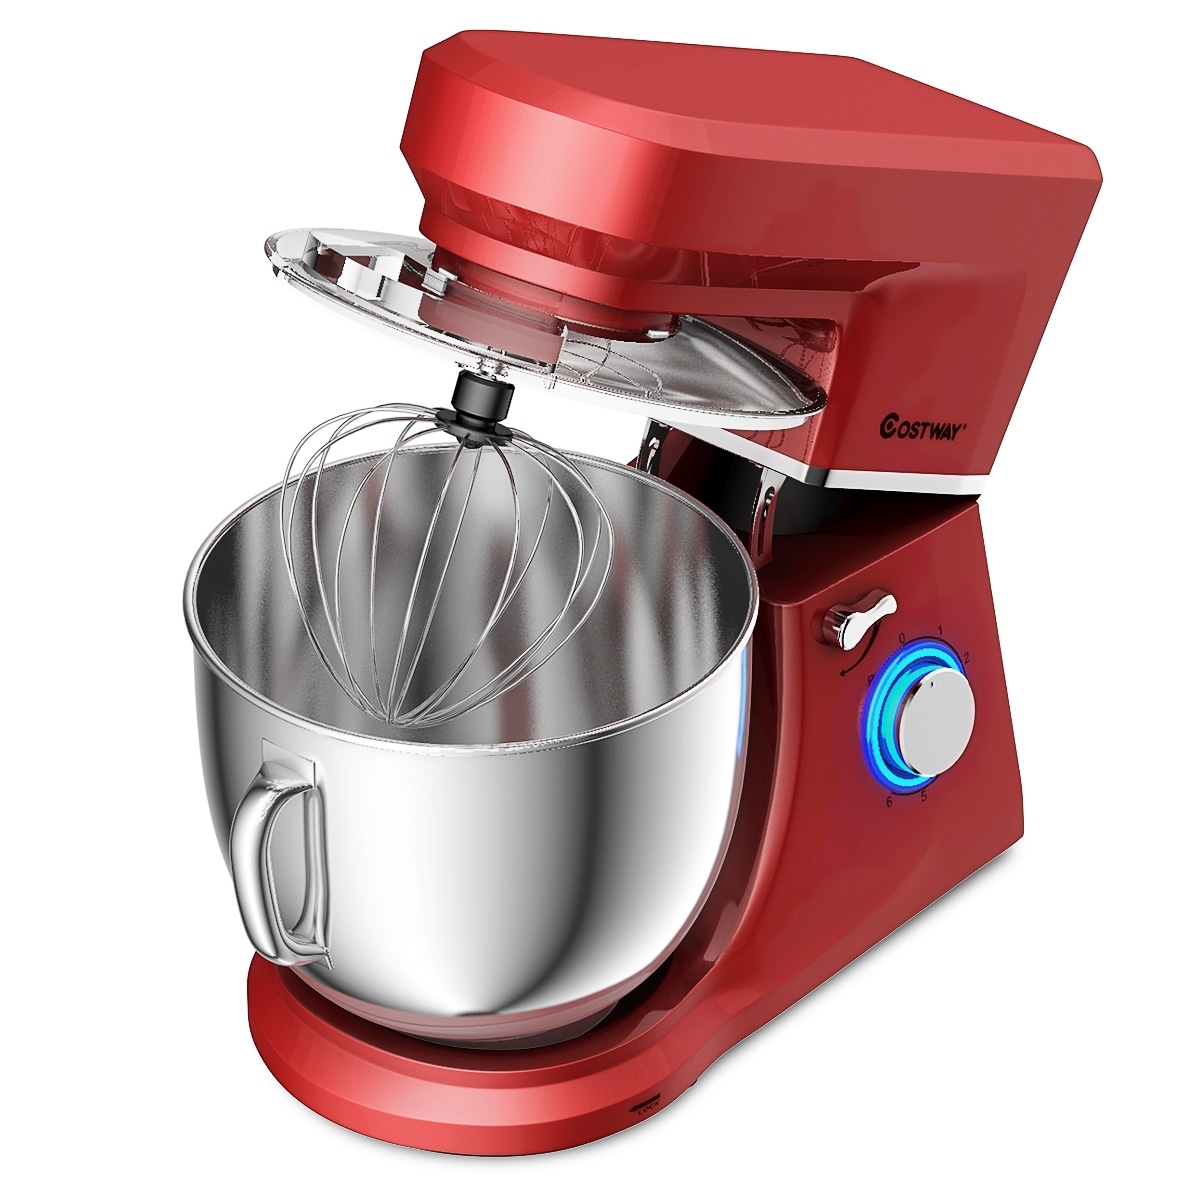 uhomepro 7.5 QT Stand Mixer for Kitchen, 6+0+P-Speed Tilt-Head